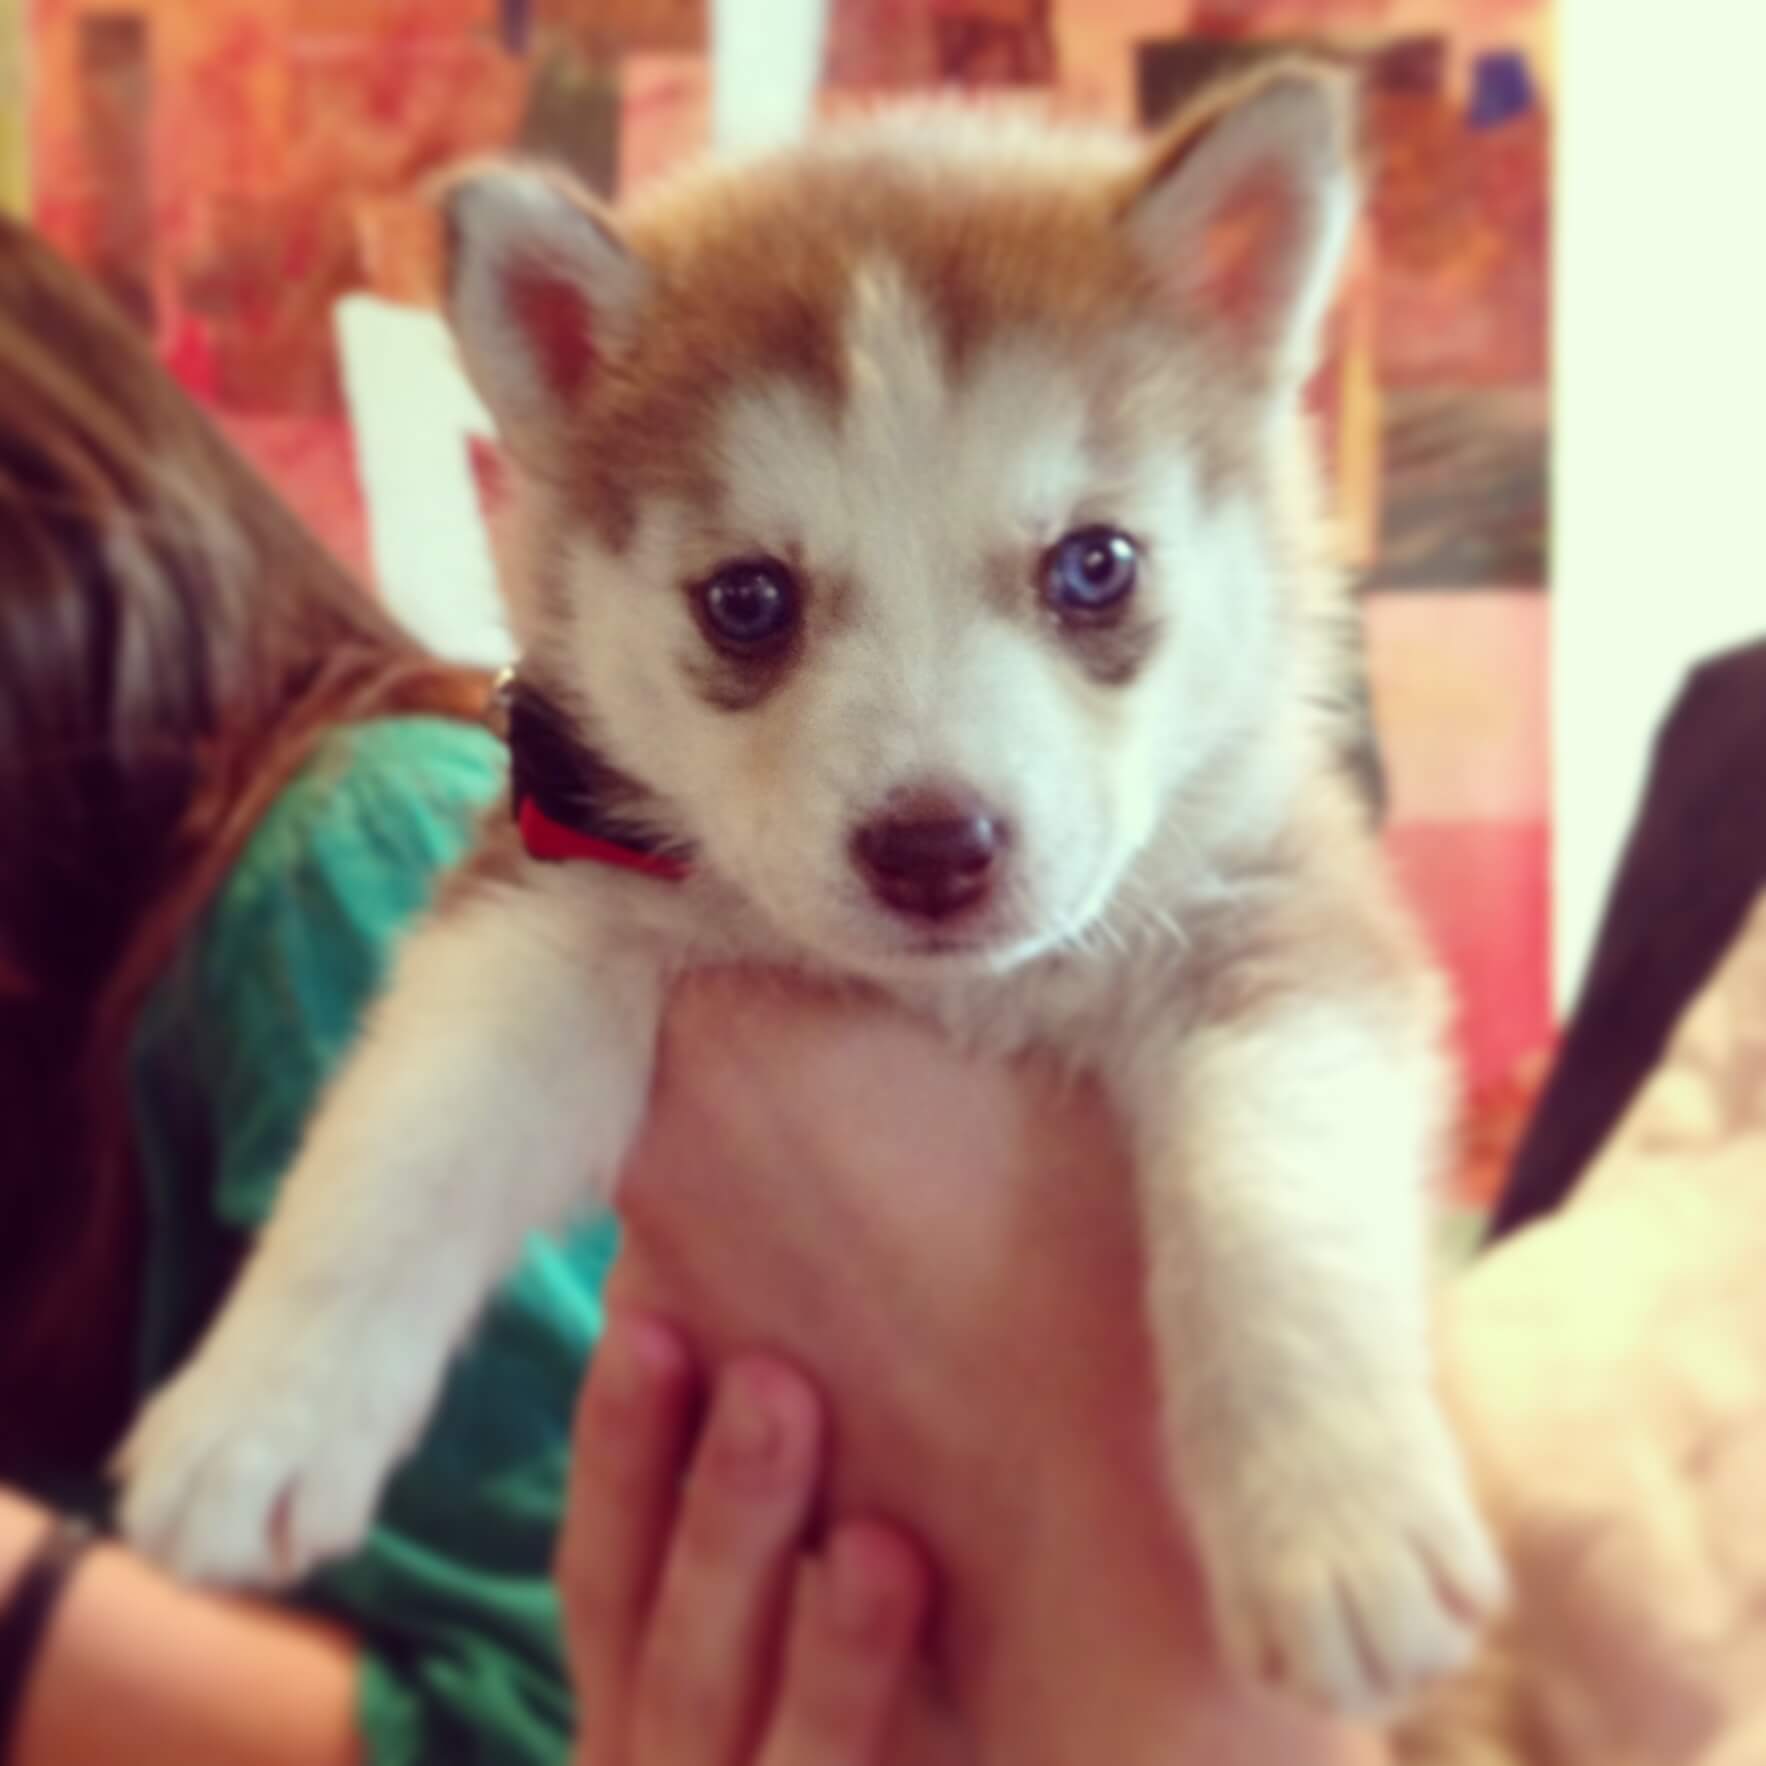 Husky pup. Watch the Ted Talk, and you'll understand!